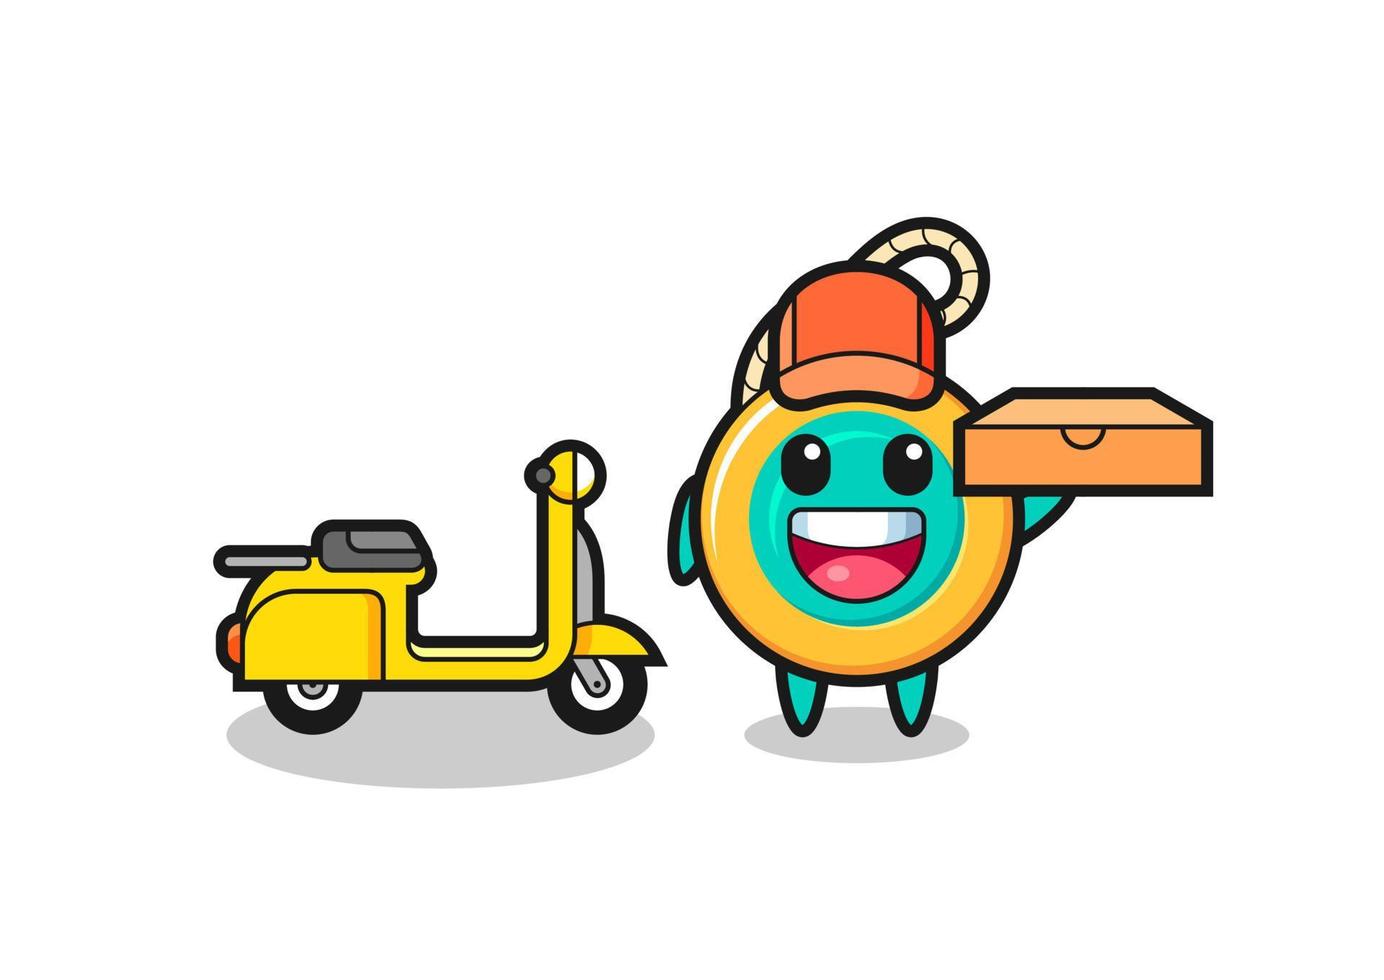 Character Illustration of yoyo as a pizza deliveryman vector